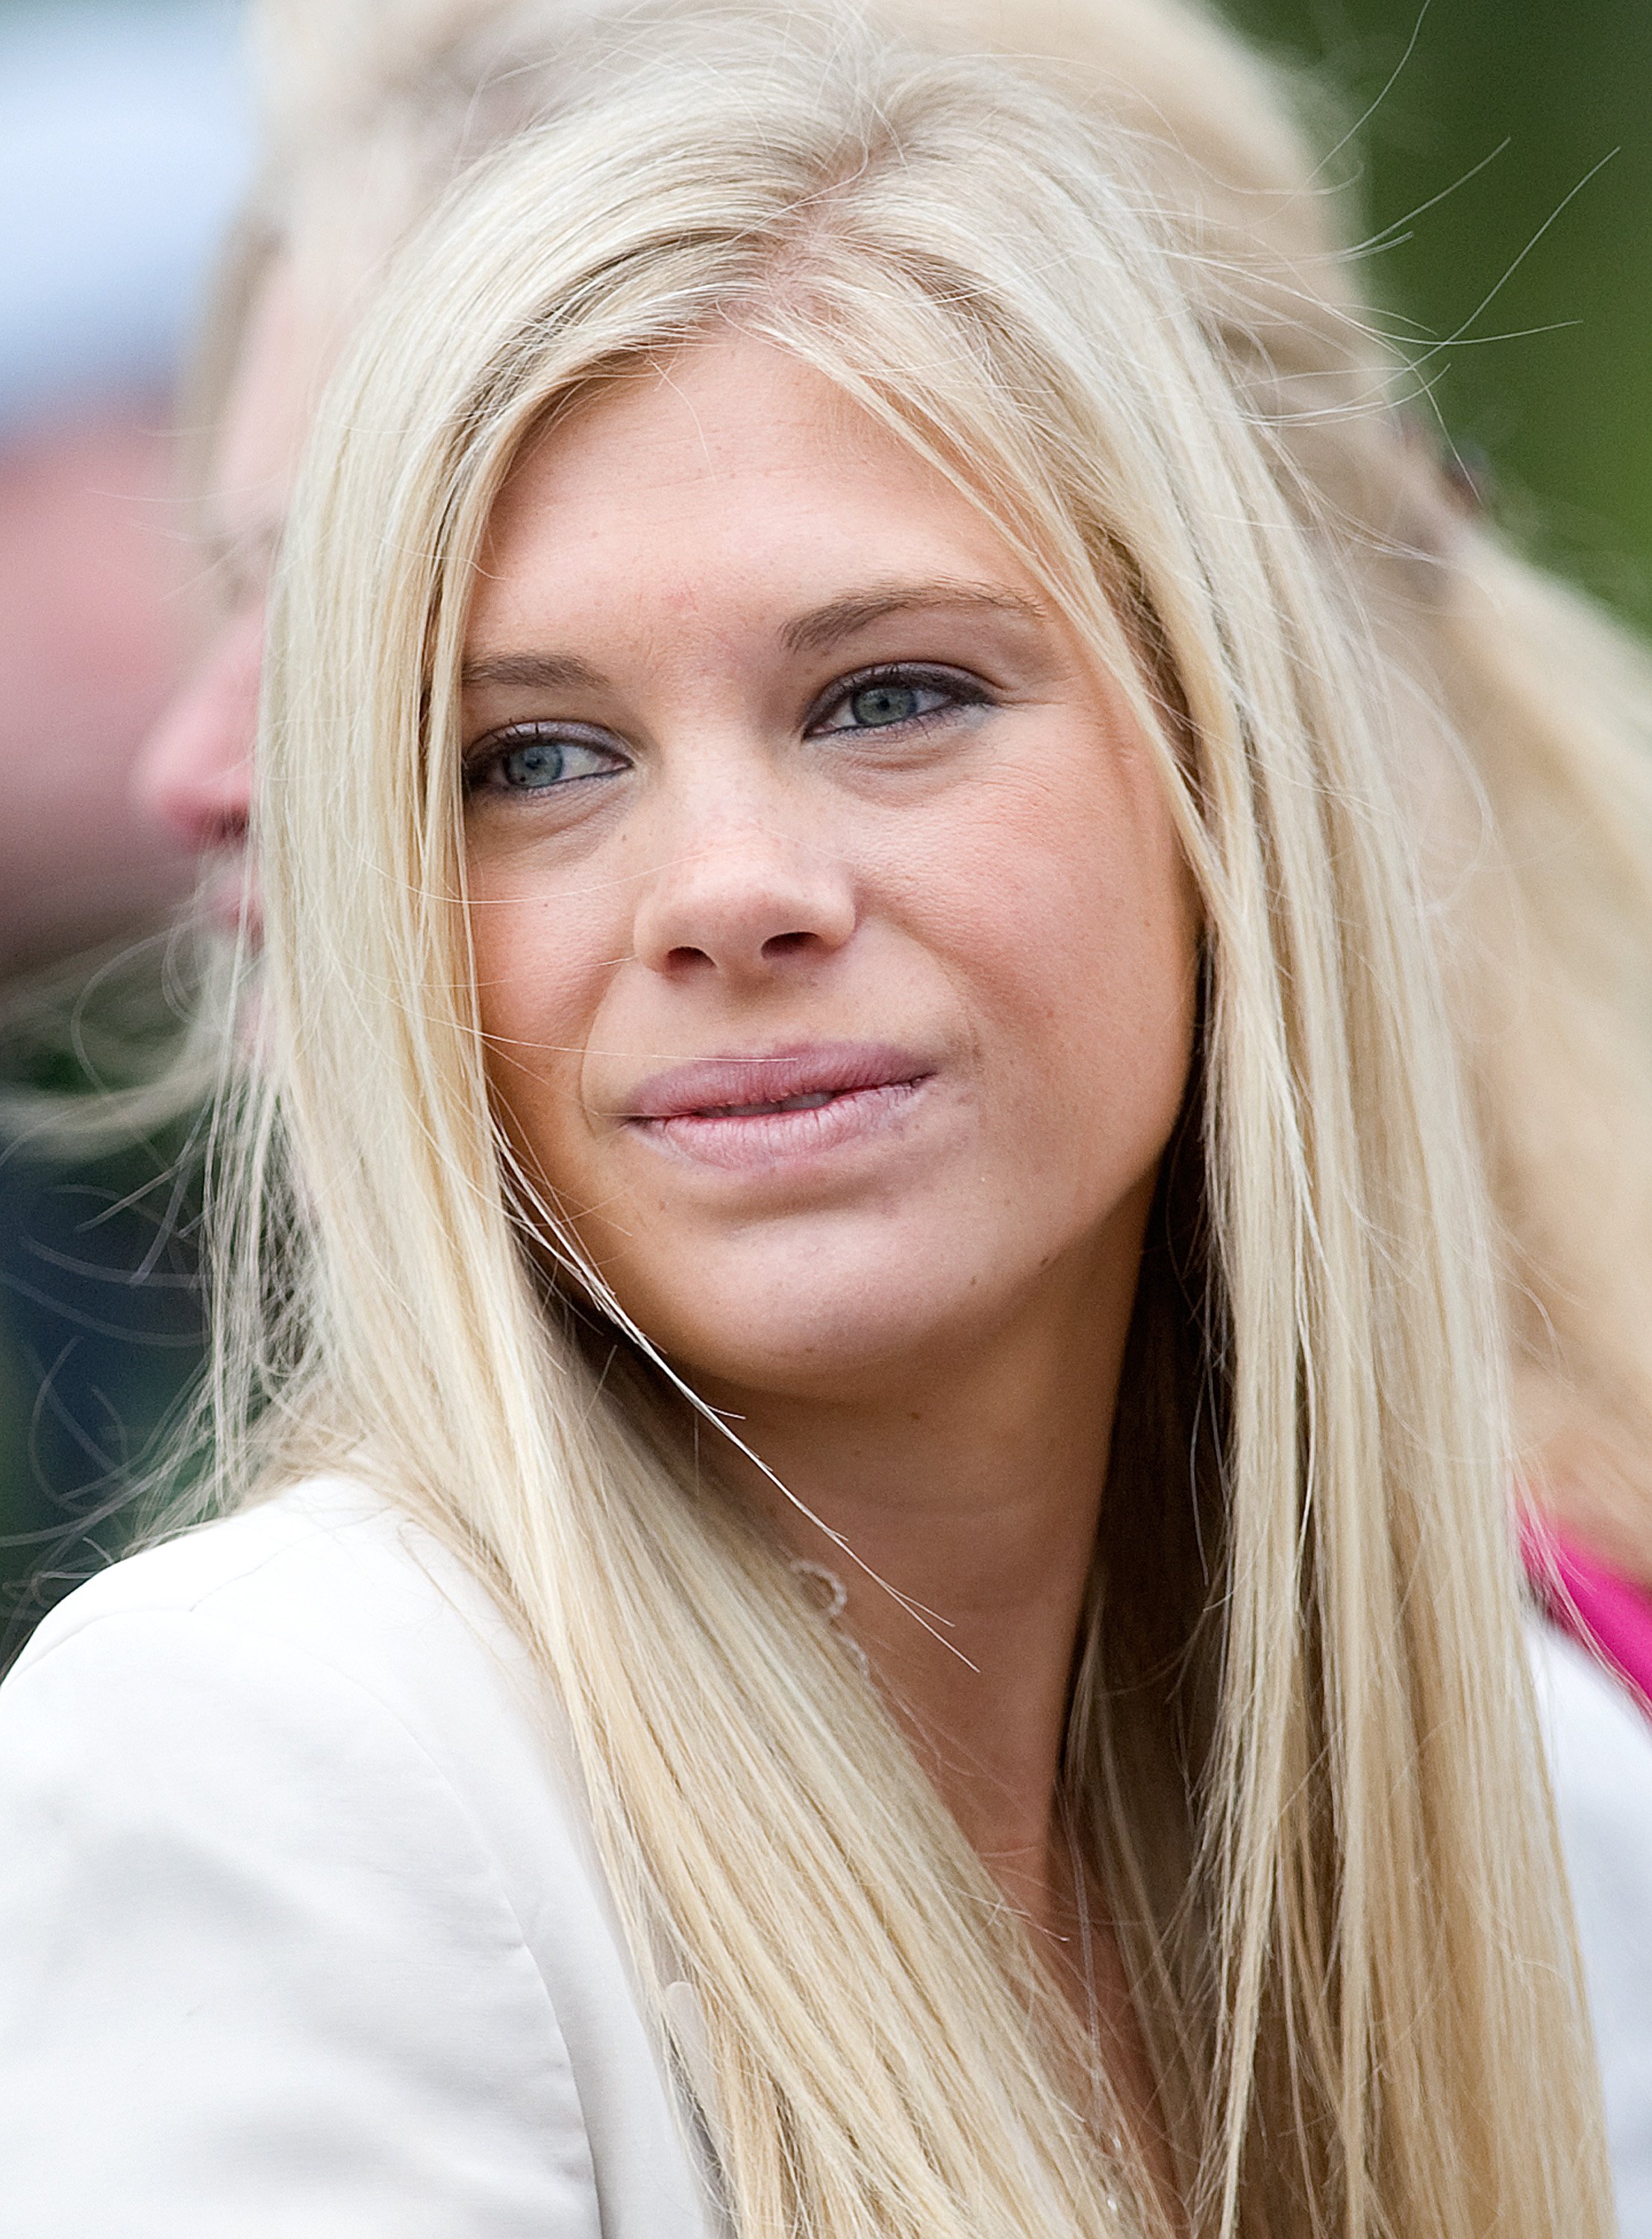 Prince Harry's ex-girlfriend Chelsy Davy. | Source: Getty Images